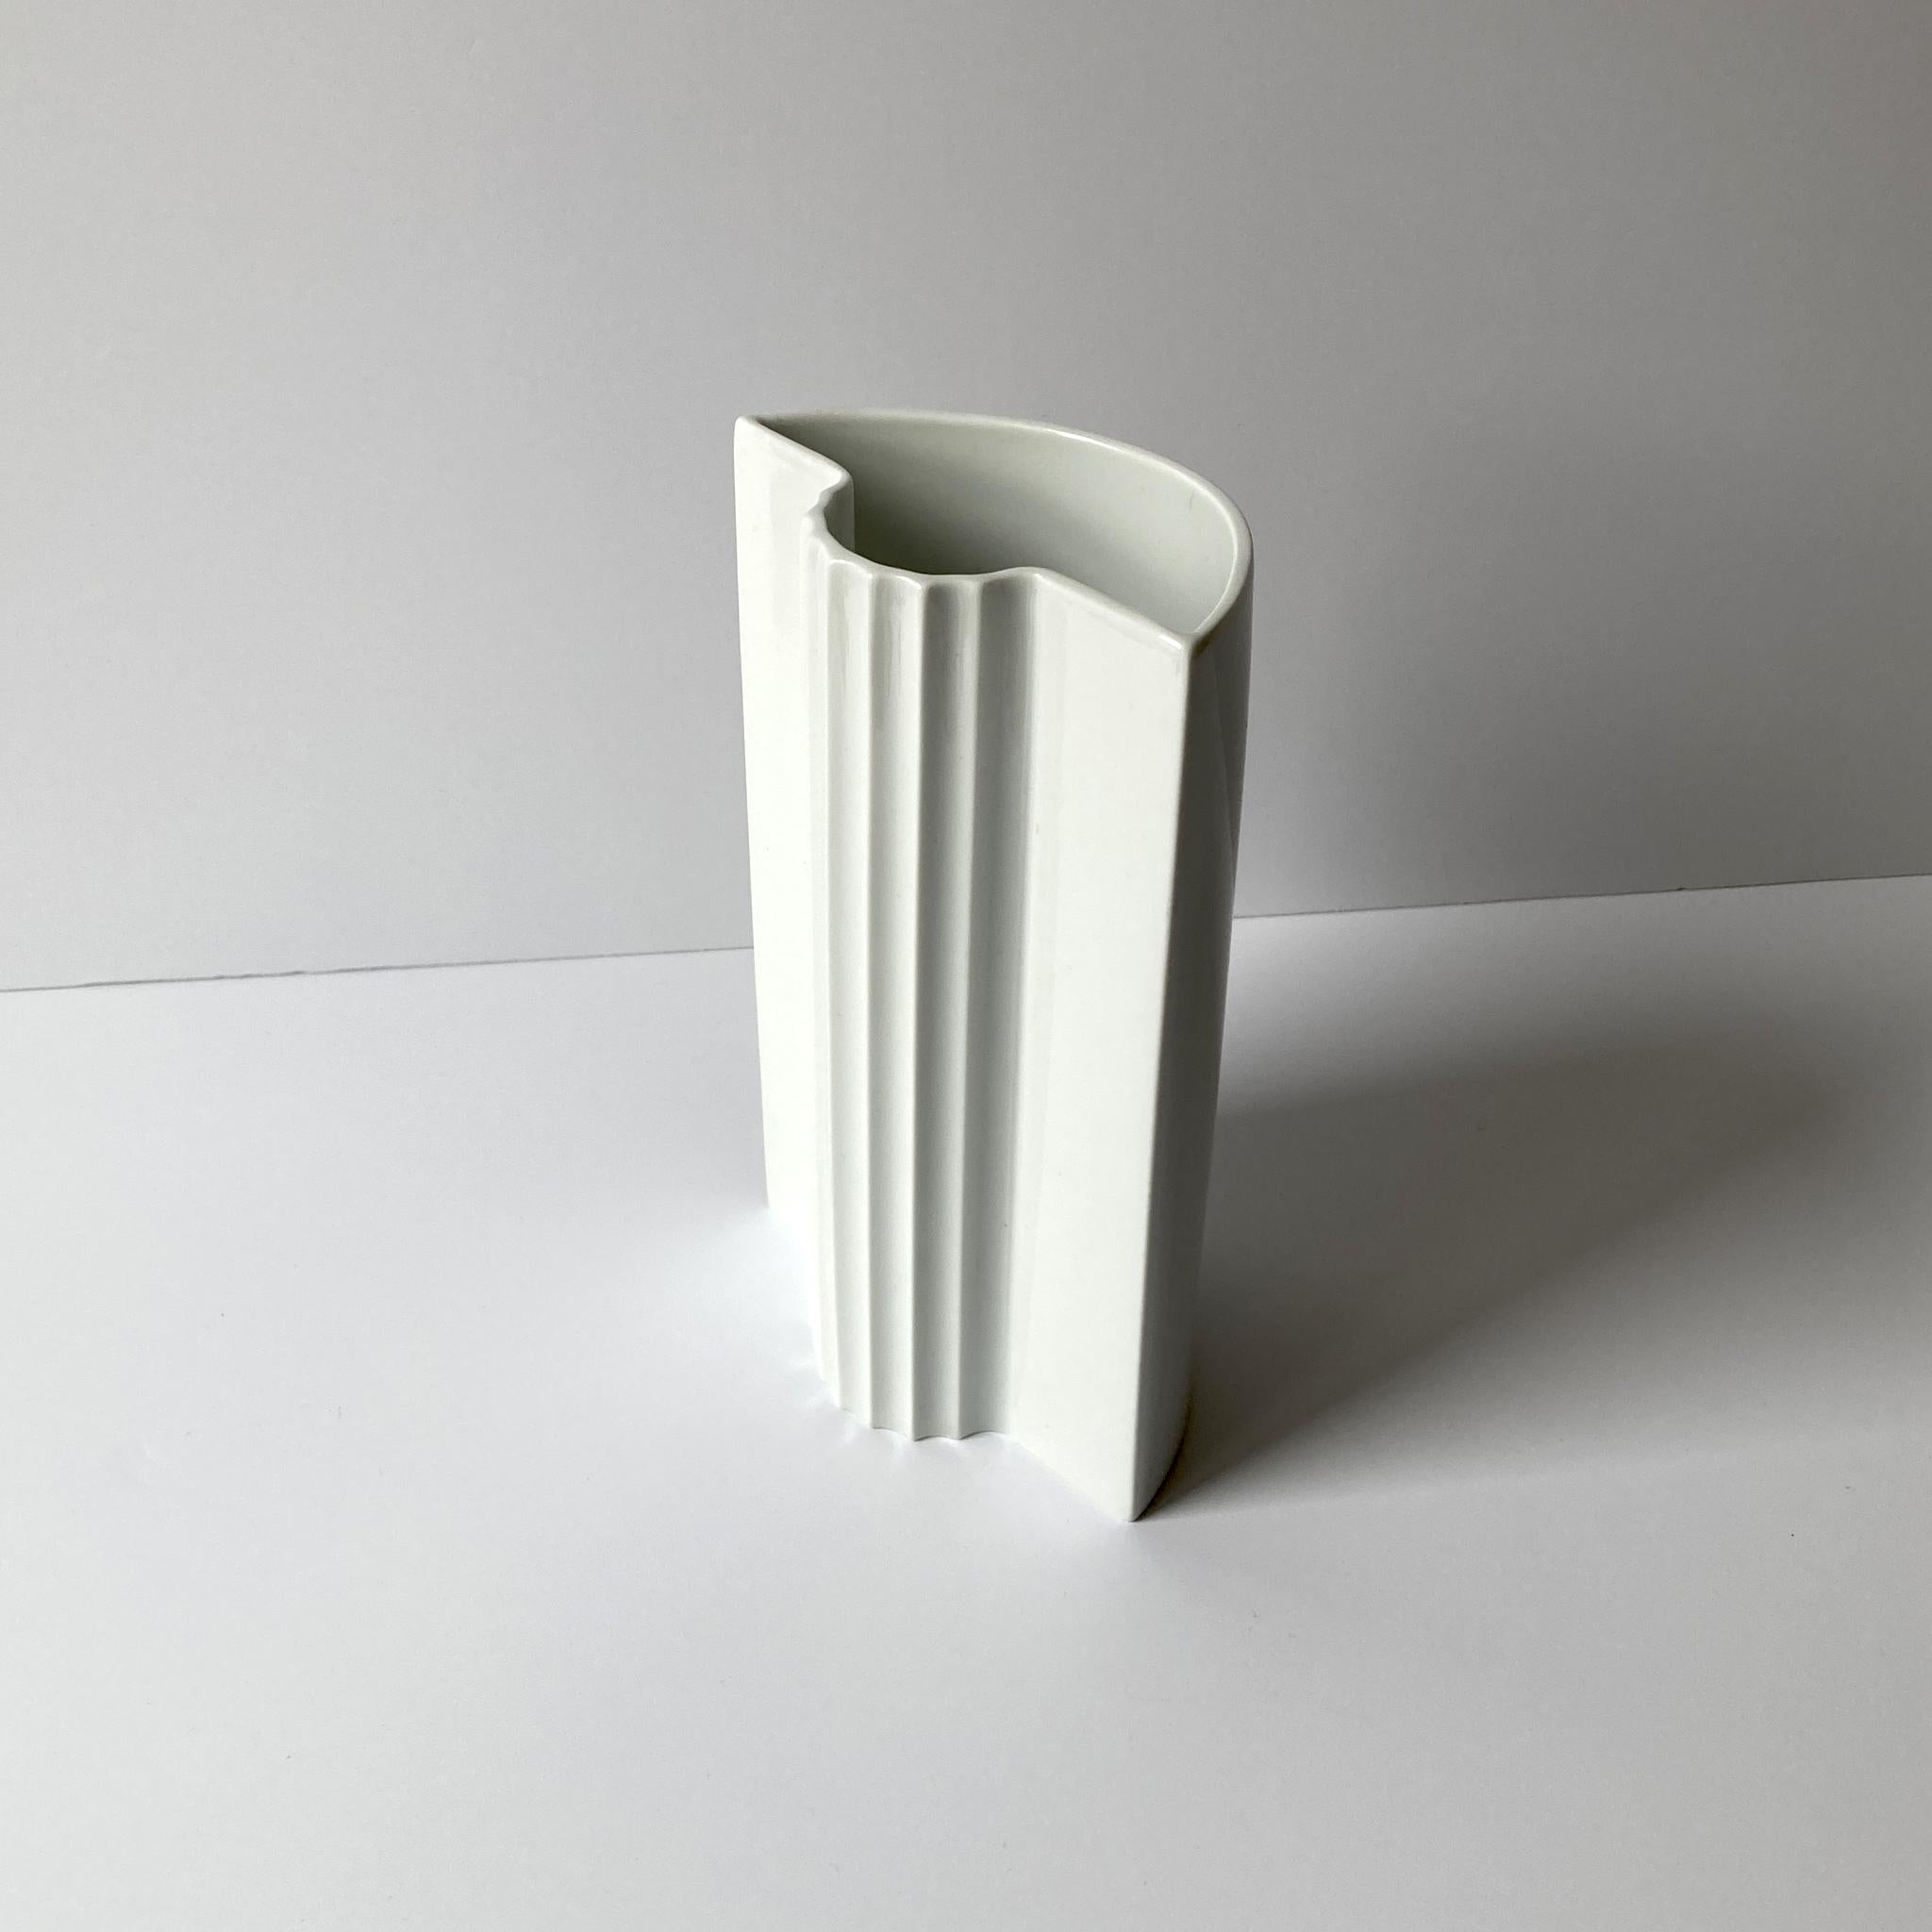 Rosenthal and Thomas Keramik White Porcelain Vases, Pair of Two For Sale 3